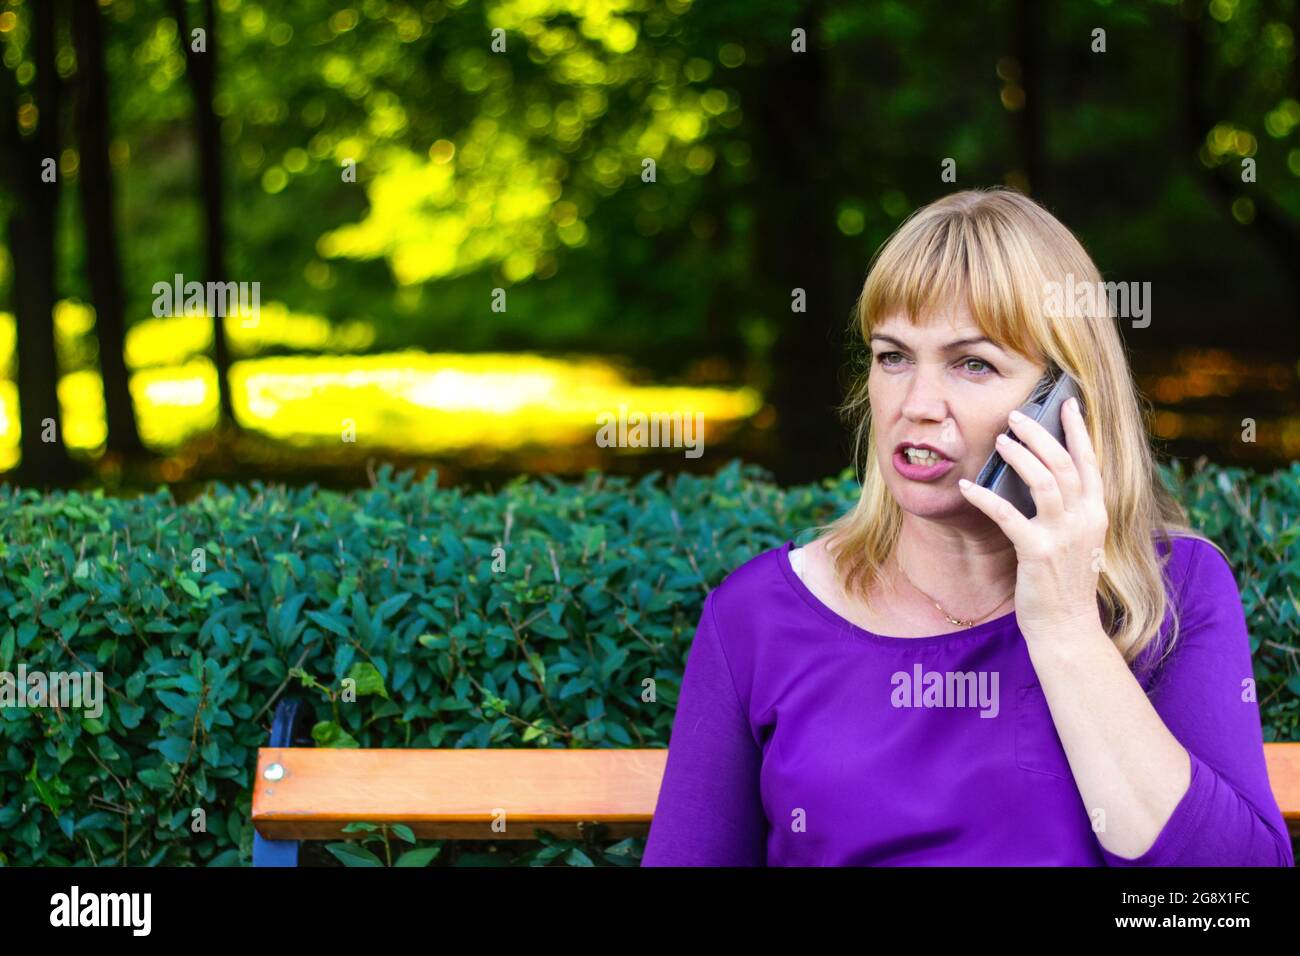 Defocus Angry Caucasian Blond Woman Talking Speaking On The Phone Outside Outdoor 40s Years